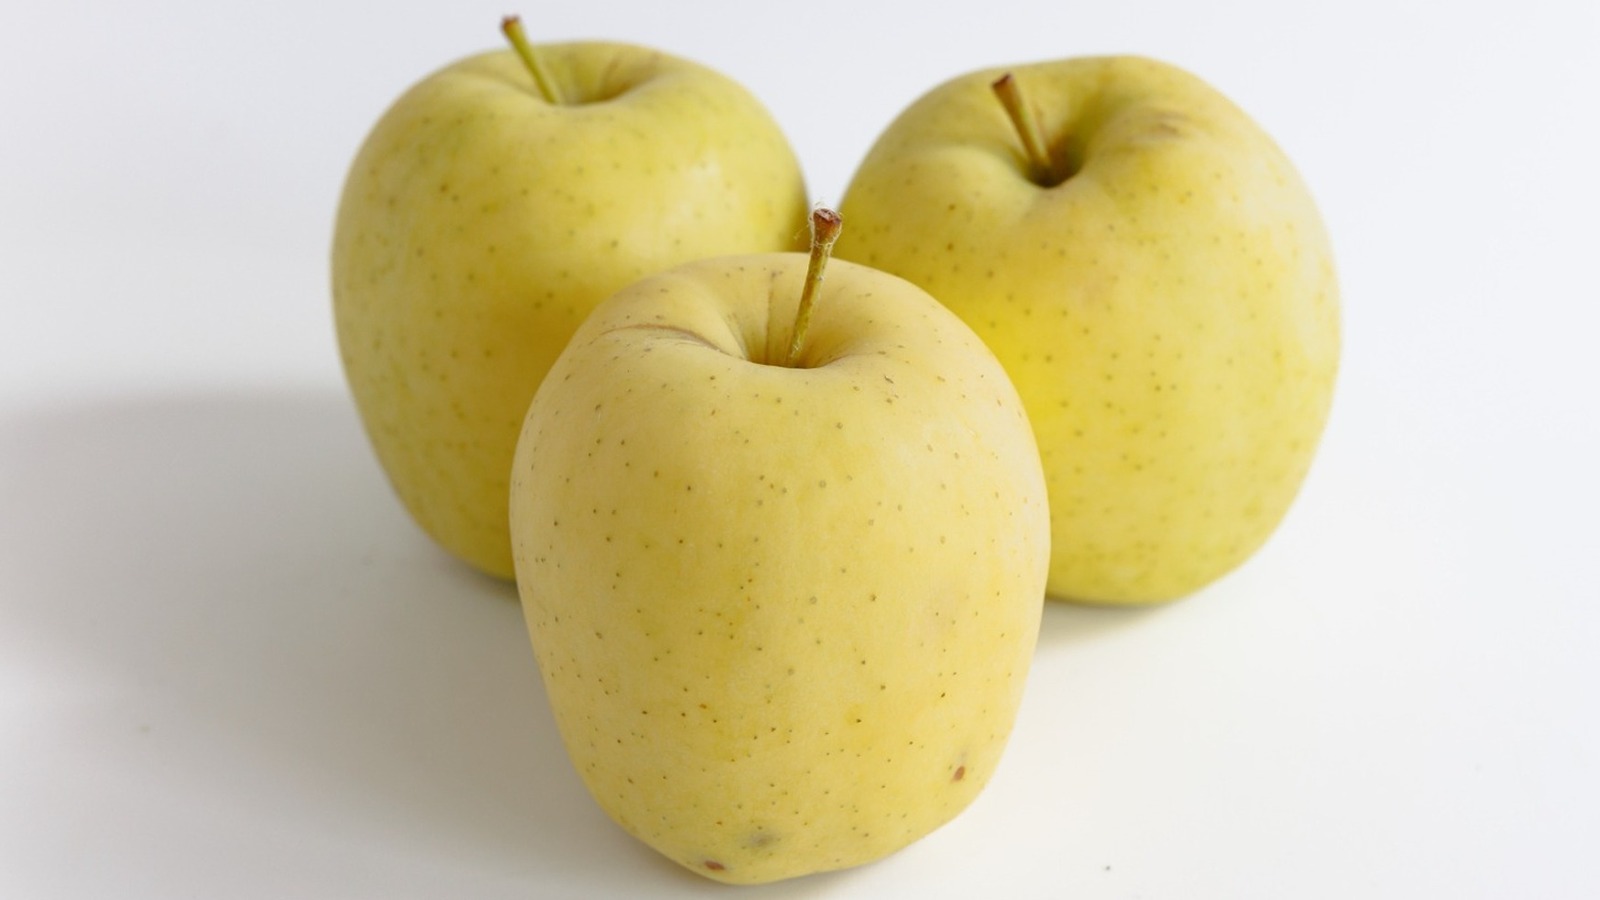 https://www.mashed.com/img/gallery/the-perfectly-balanced-apple-exists-and-its-the-golden-delicious/l-intro-1696636652.jpg